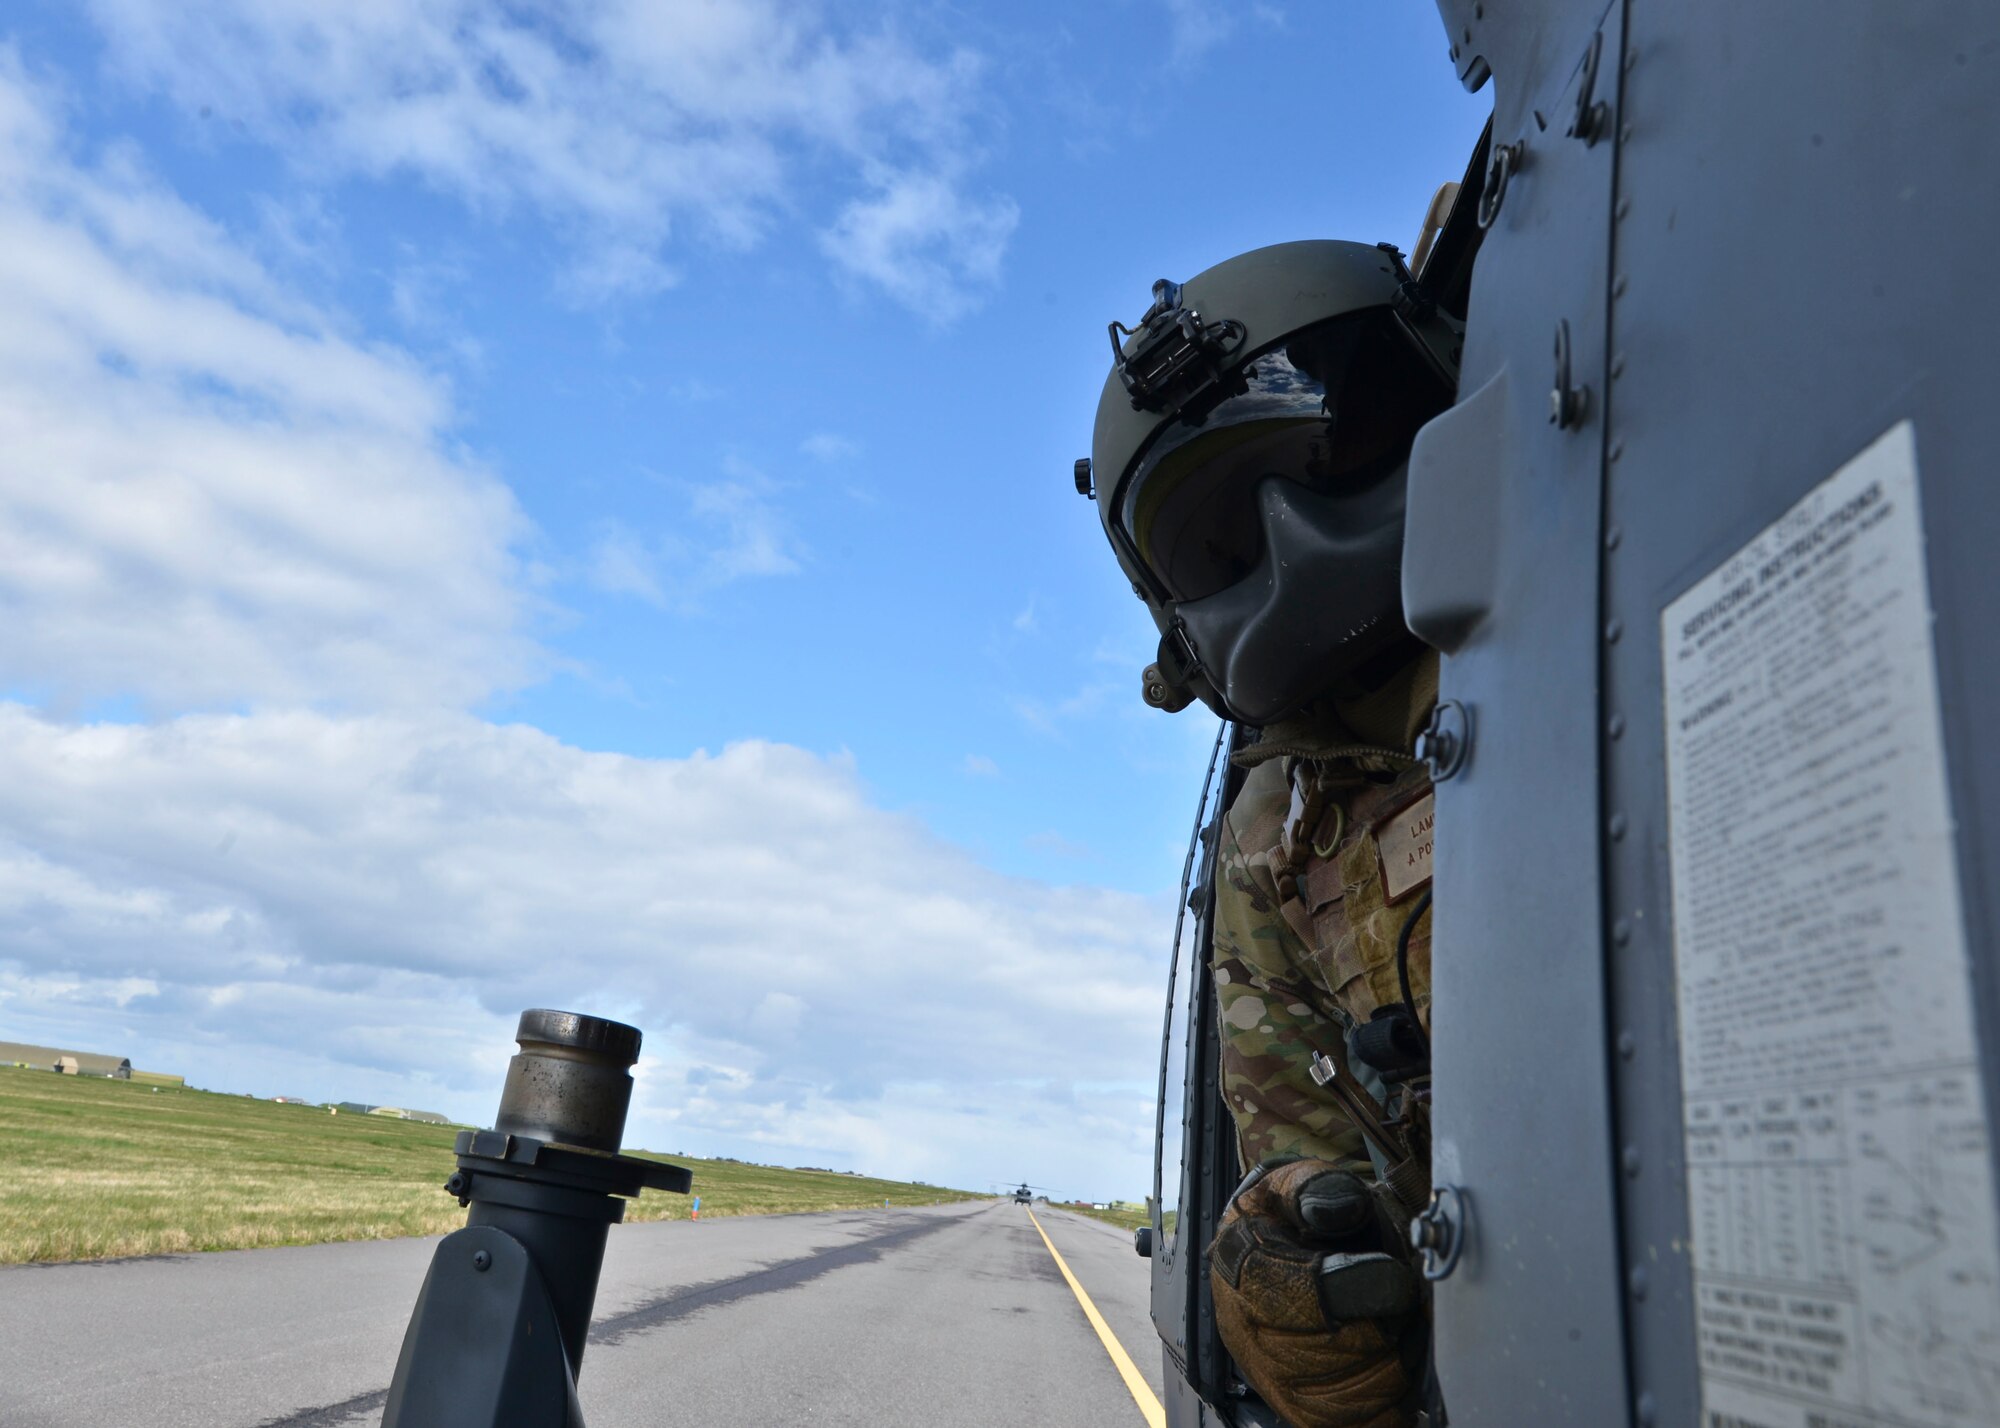 Staff Sgt. William Lambert, a 56th Rescue Squadron special mission aviator instructor, inspects the tail of an HH-60G Pave Hawk during Joint Warrior 2016 at Royal Air Force Lossiemouth, Scotland, April 15, 2016. The training provided the 56th RQS with the opportunity to work hand in hand with other rescue forces from the U.S. and their foreign equivalents. (U.S. Air Force photo/Senior Airman Nigel Sandridge)